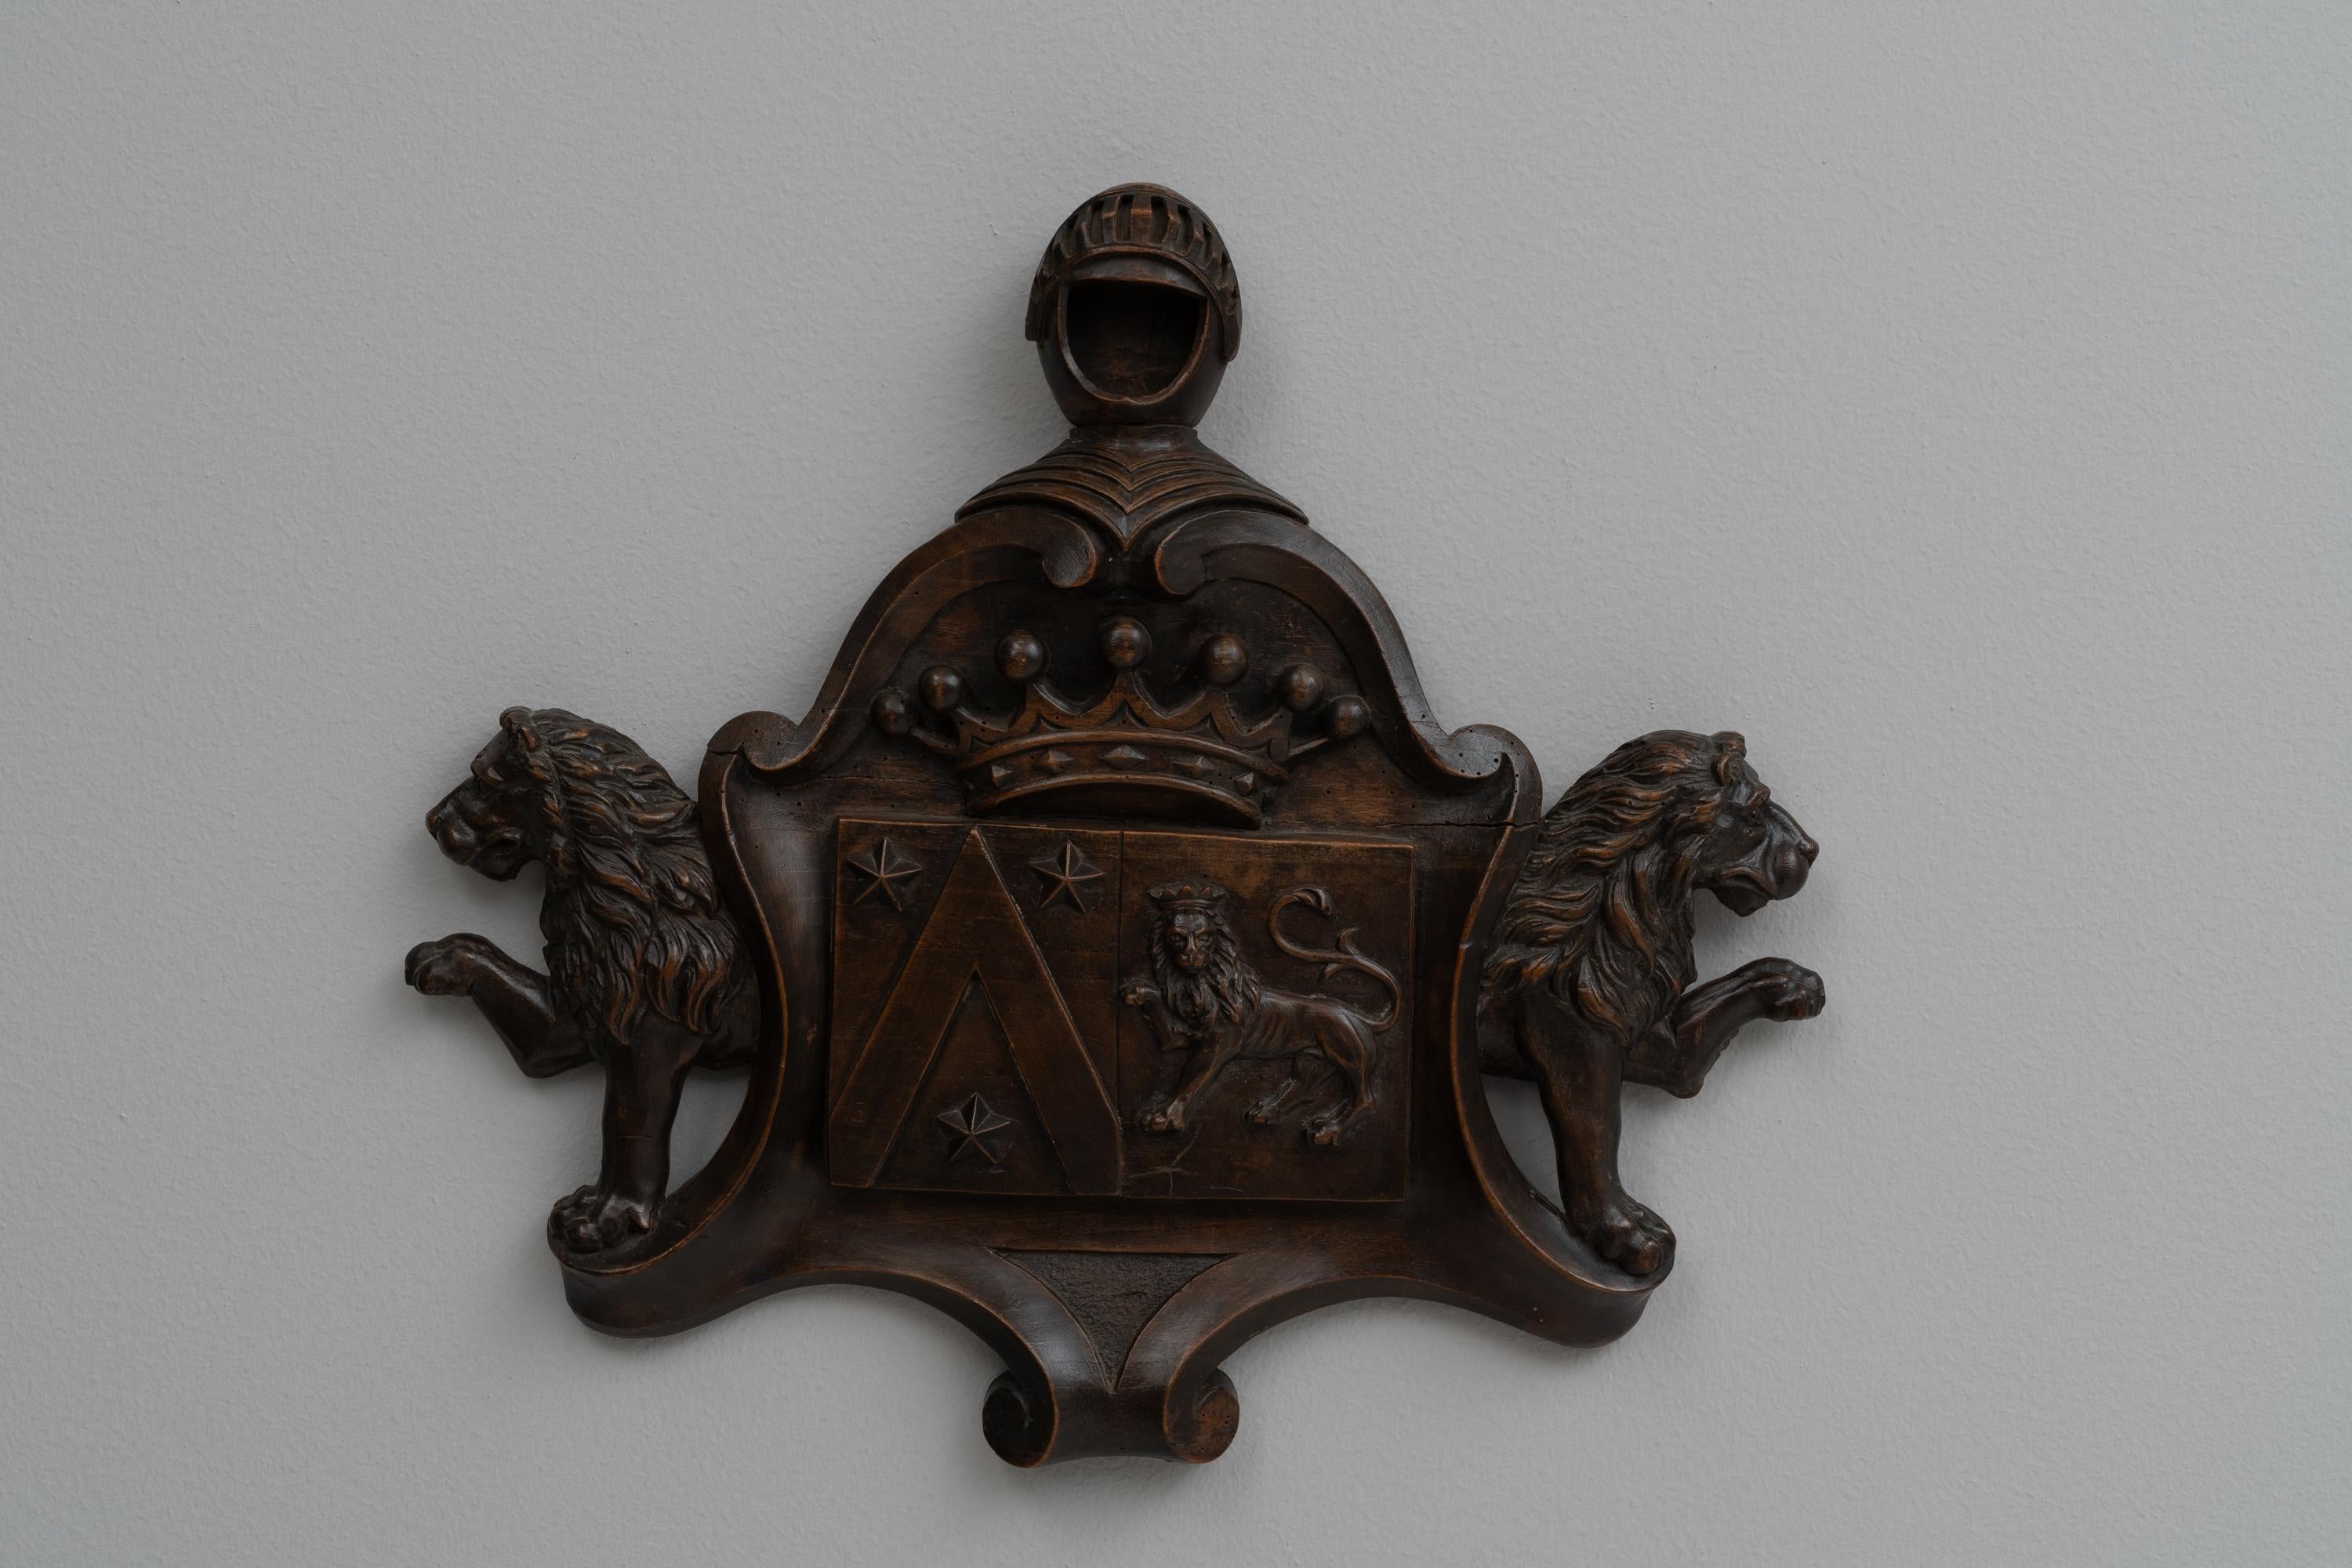 This early 1900s Belgian Wooden Wall Decoration is a magnificent piece of craftsmanship, rich with historical charm and artistic detail. Intricately carved in dark wood, it features a regal crest flanked by two robust lions, symbolizing strength and